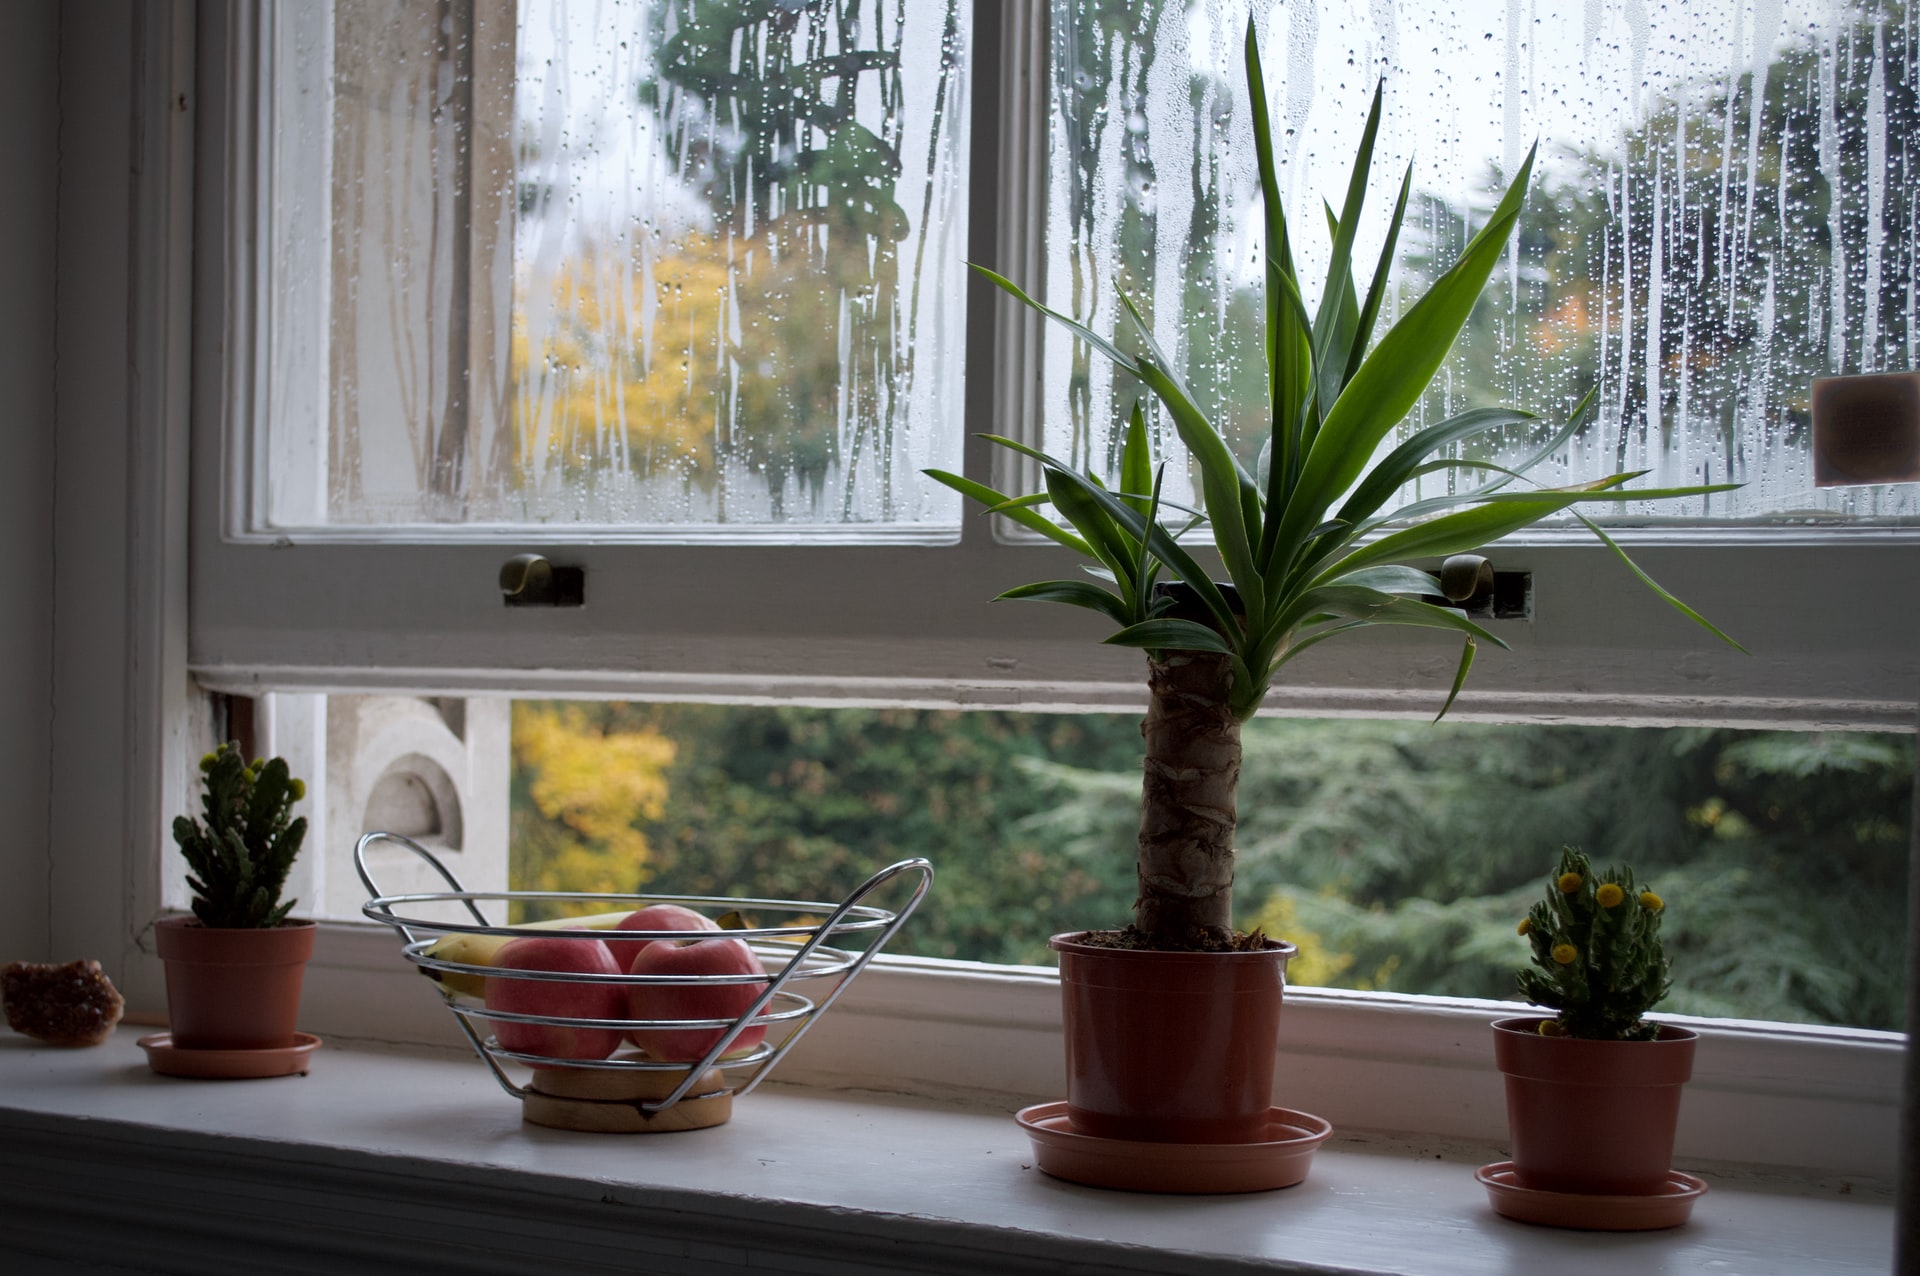 Raising Home Humidity in Dry Winter Months